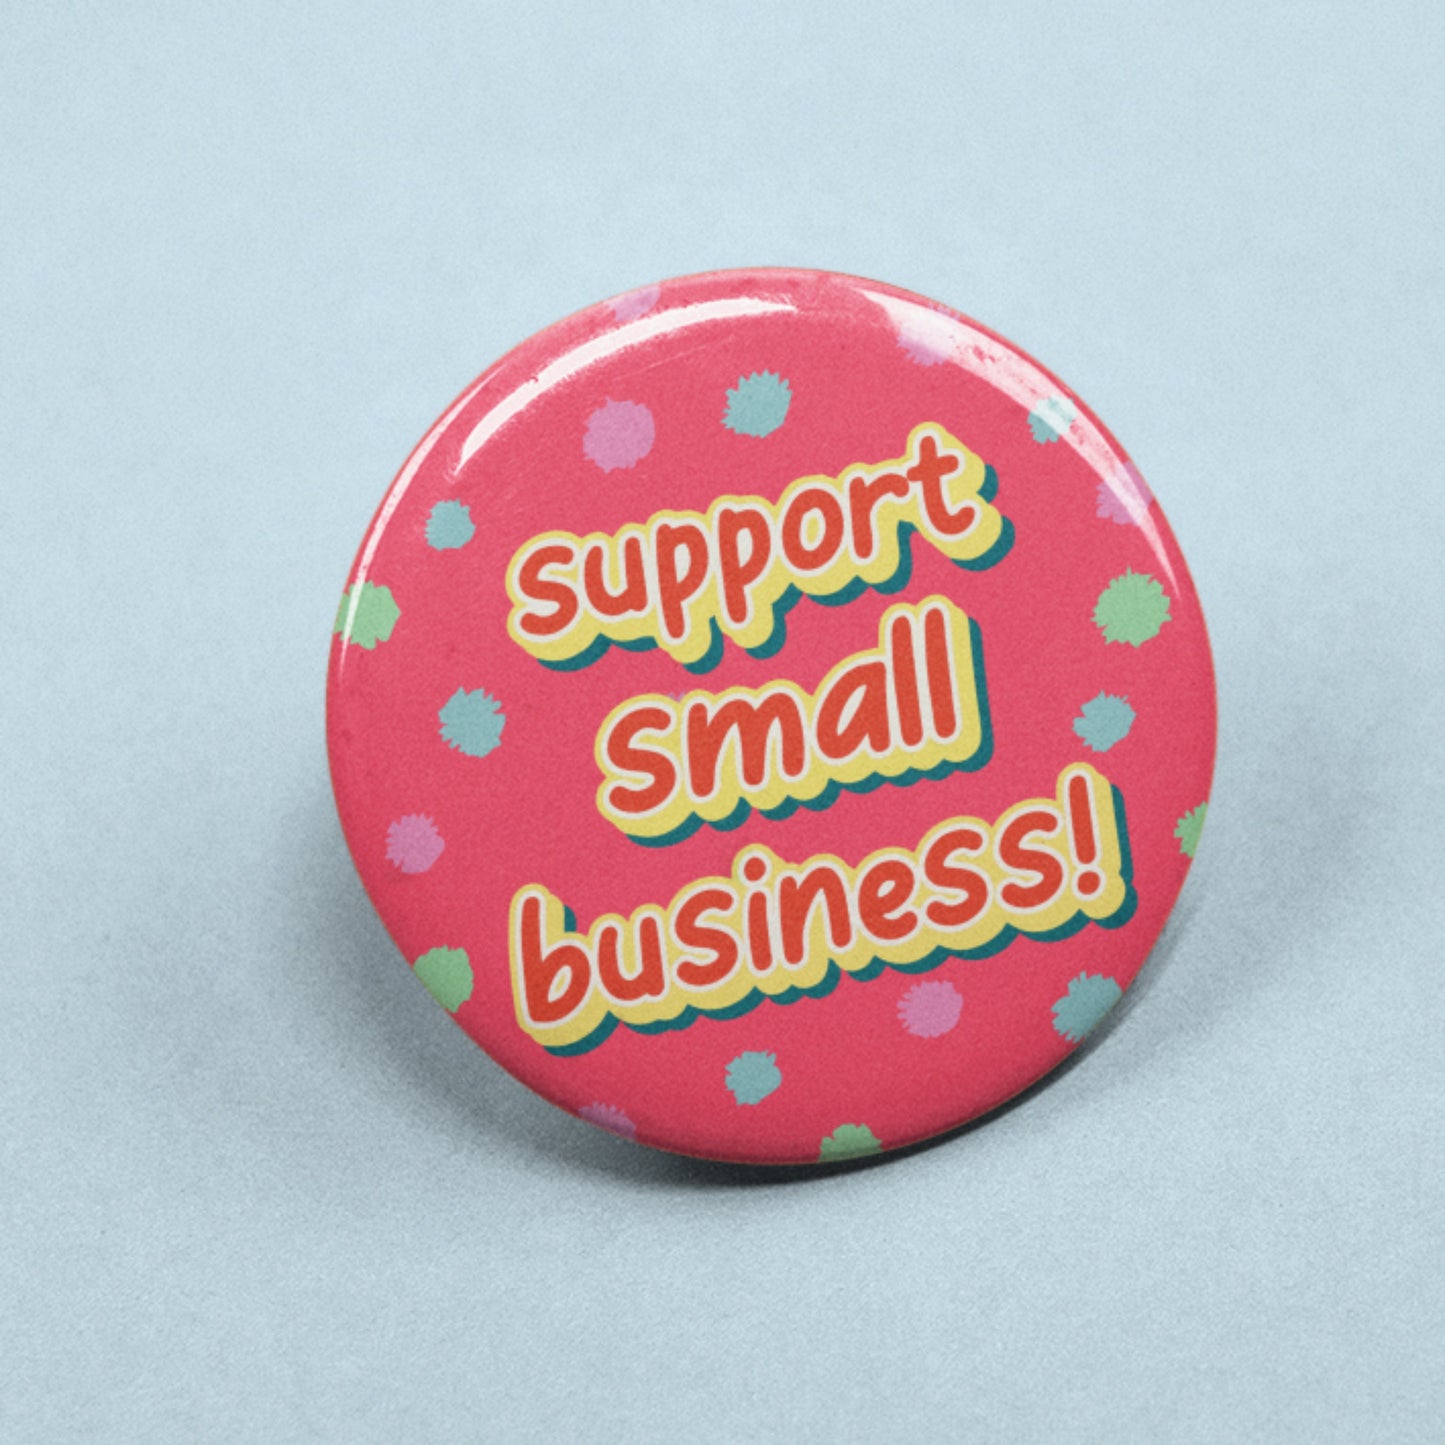 Support Small Business - Badge Pin | Business Owner, Shop Small